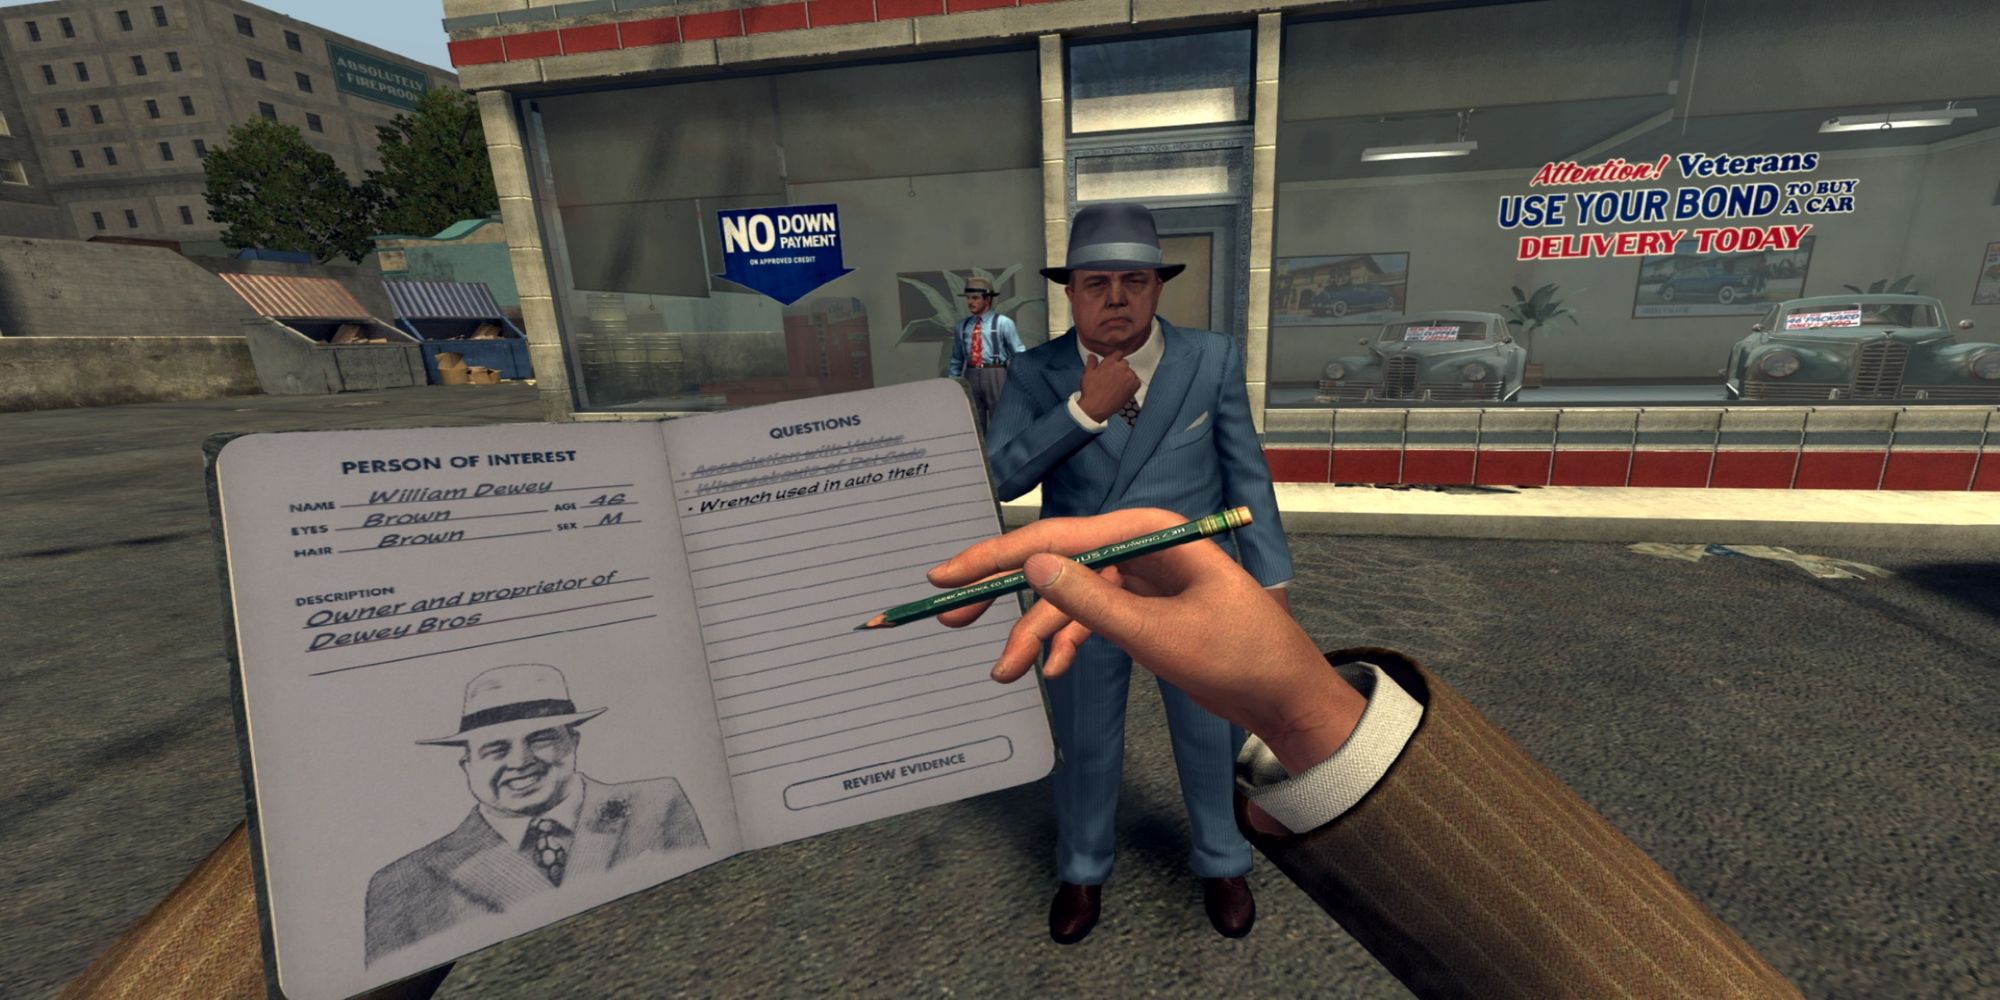 Cole Phelps and William Dewey From L.A. Noire The VR Case Files